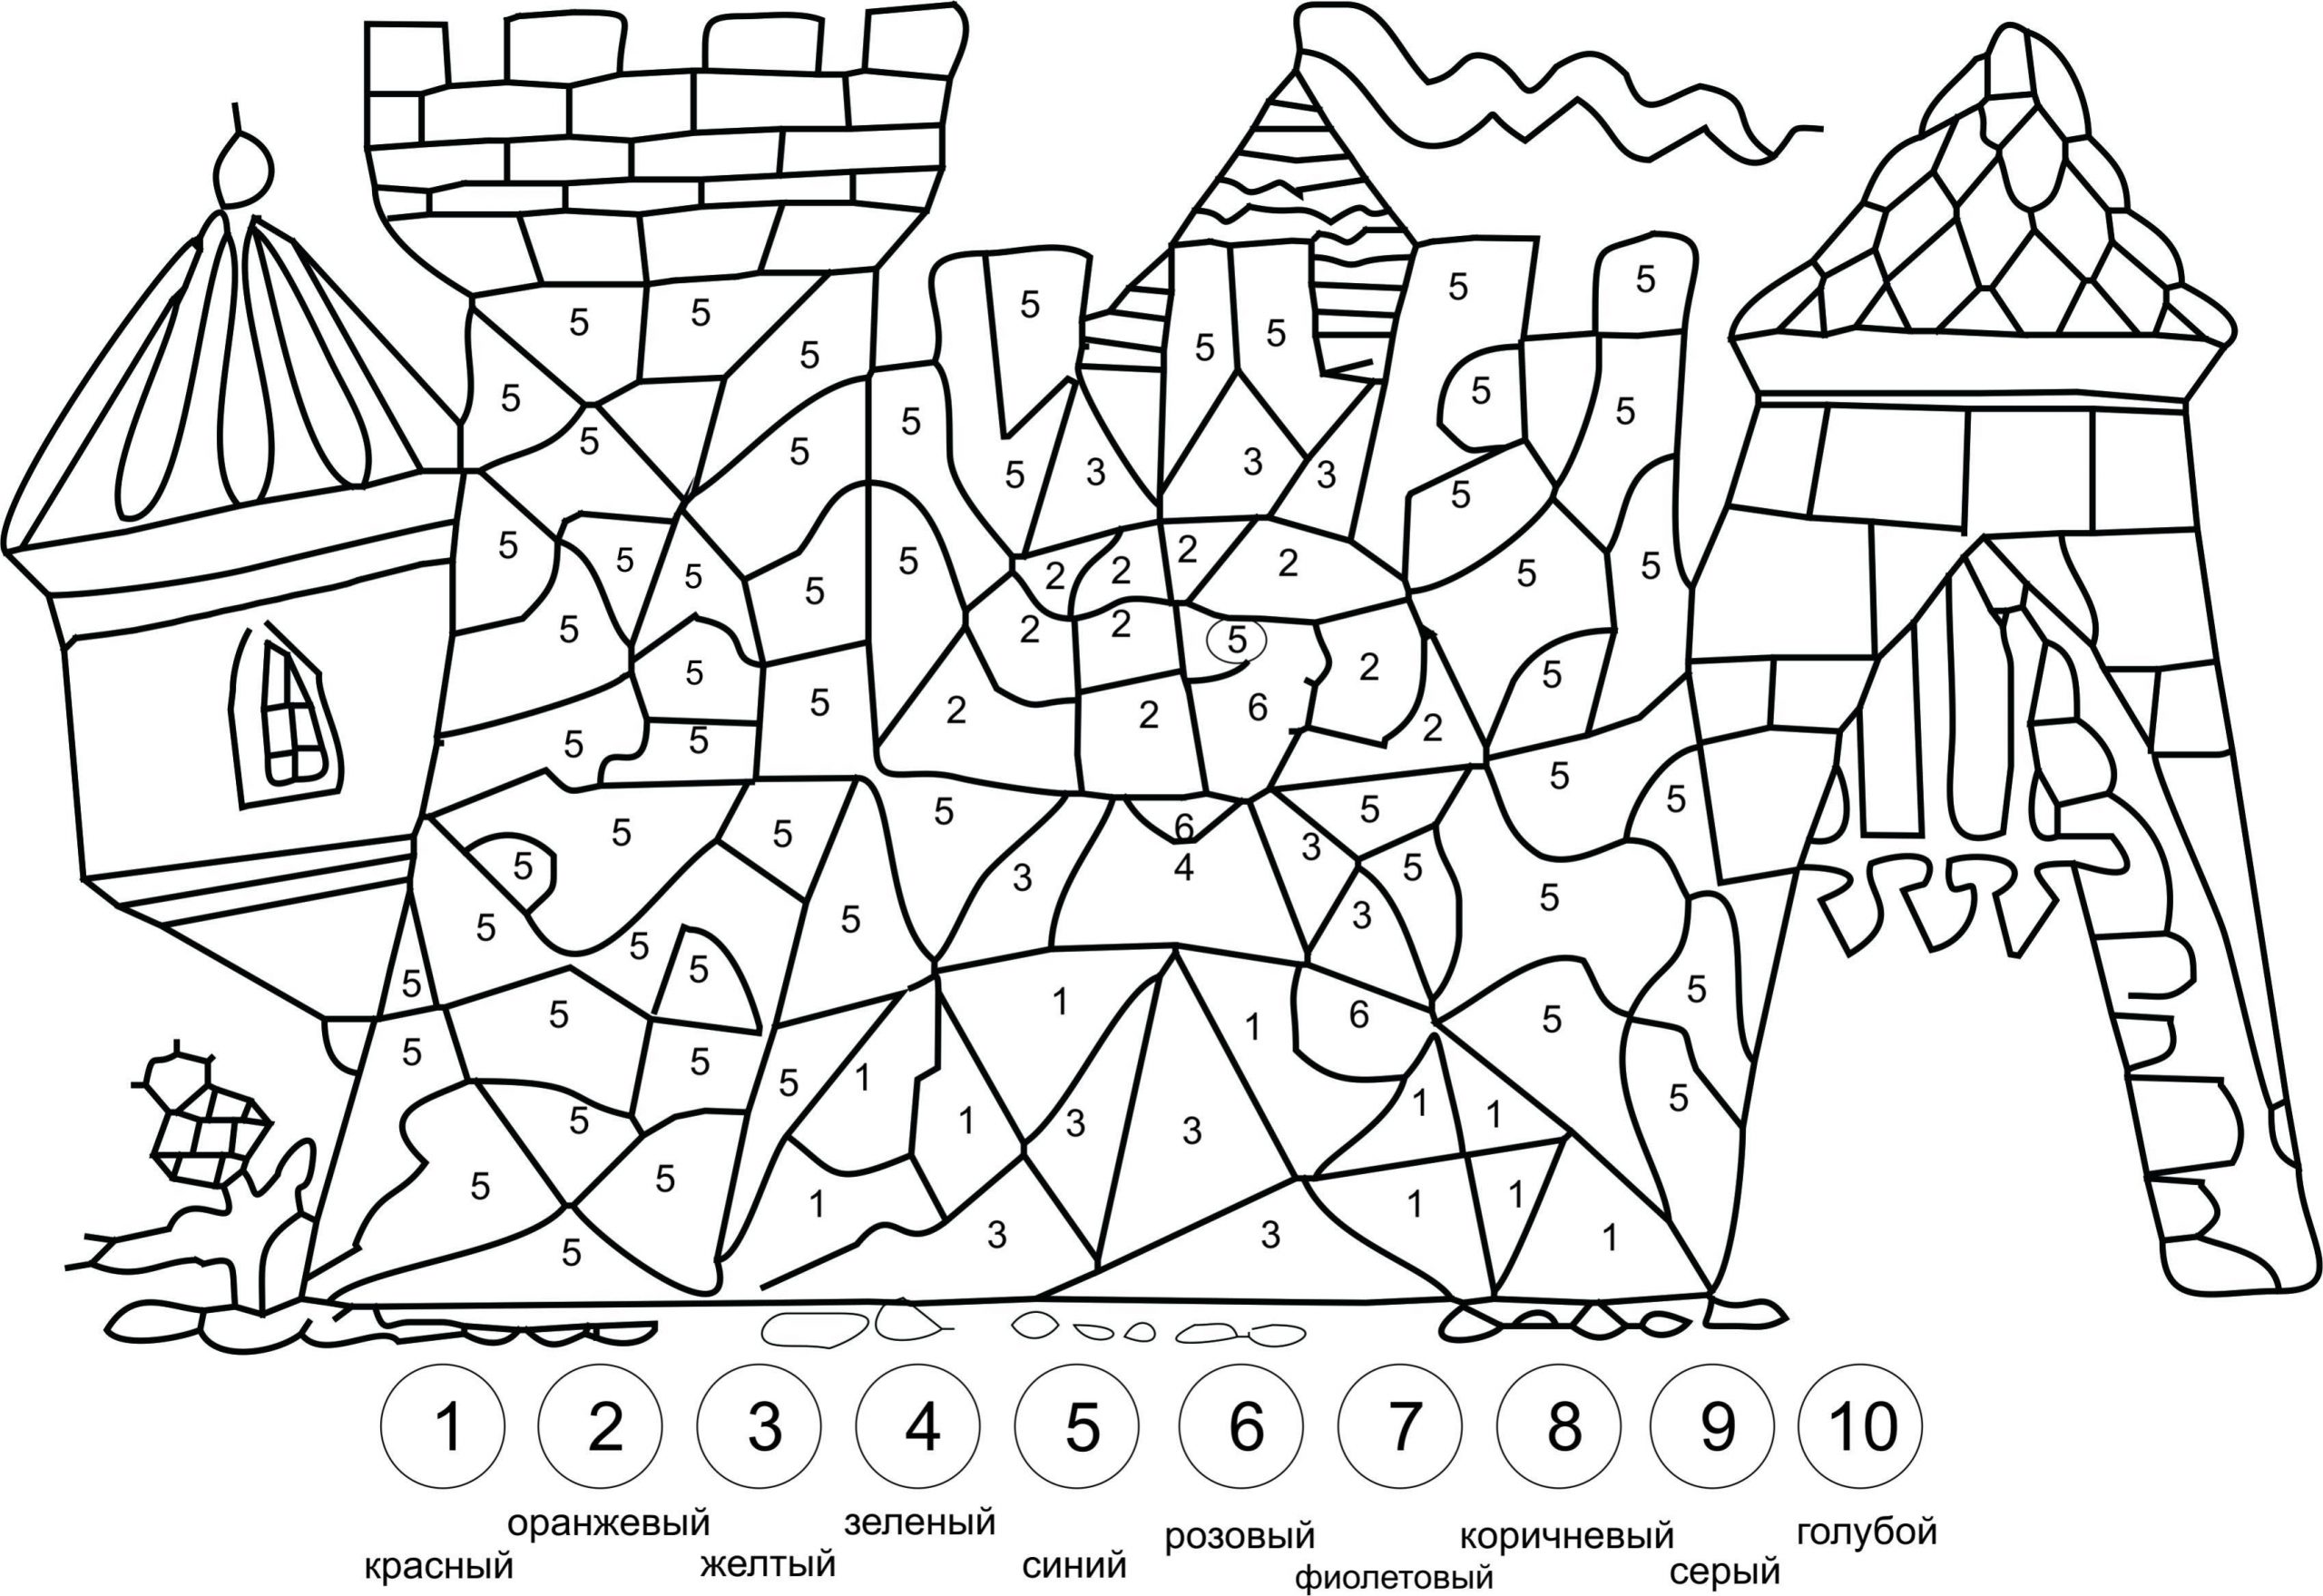 Coloring pages for grade 1 with examples of a fortress